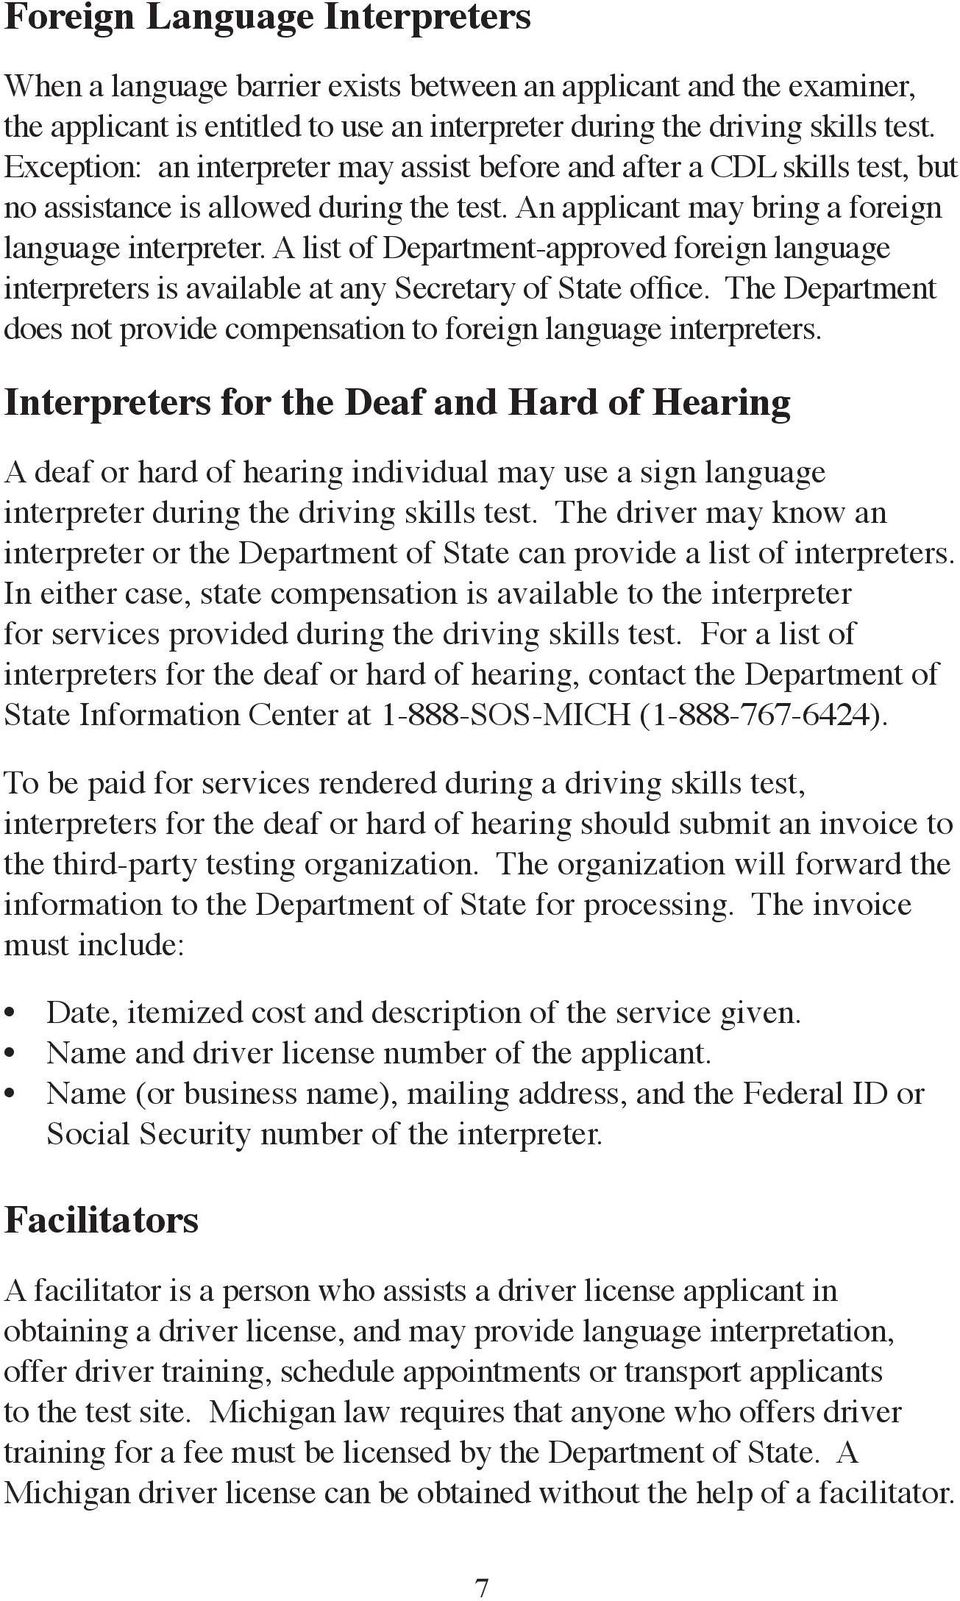 A list of Department-approved foreign language interpreters is available at any Secretary of State office. The Department does not provide compensation to foreign language interpreters.